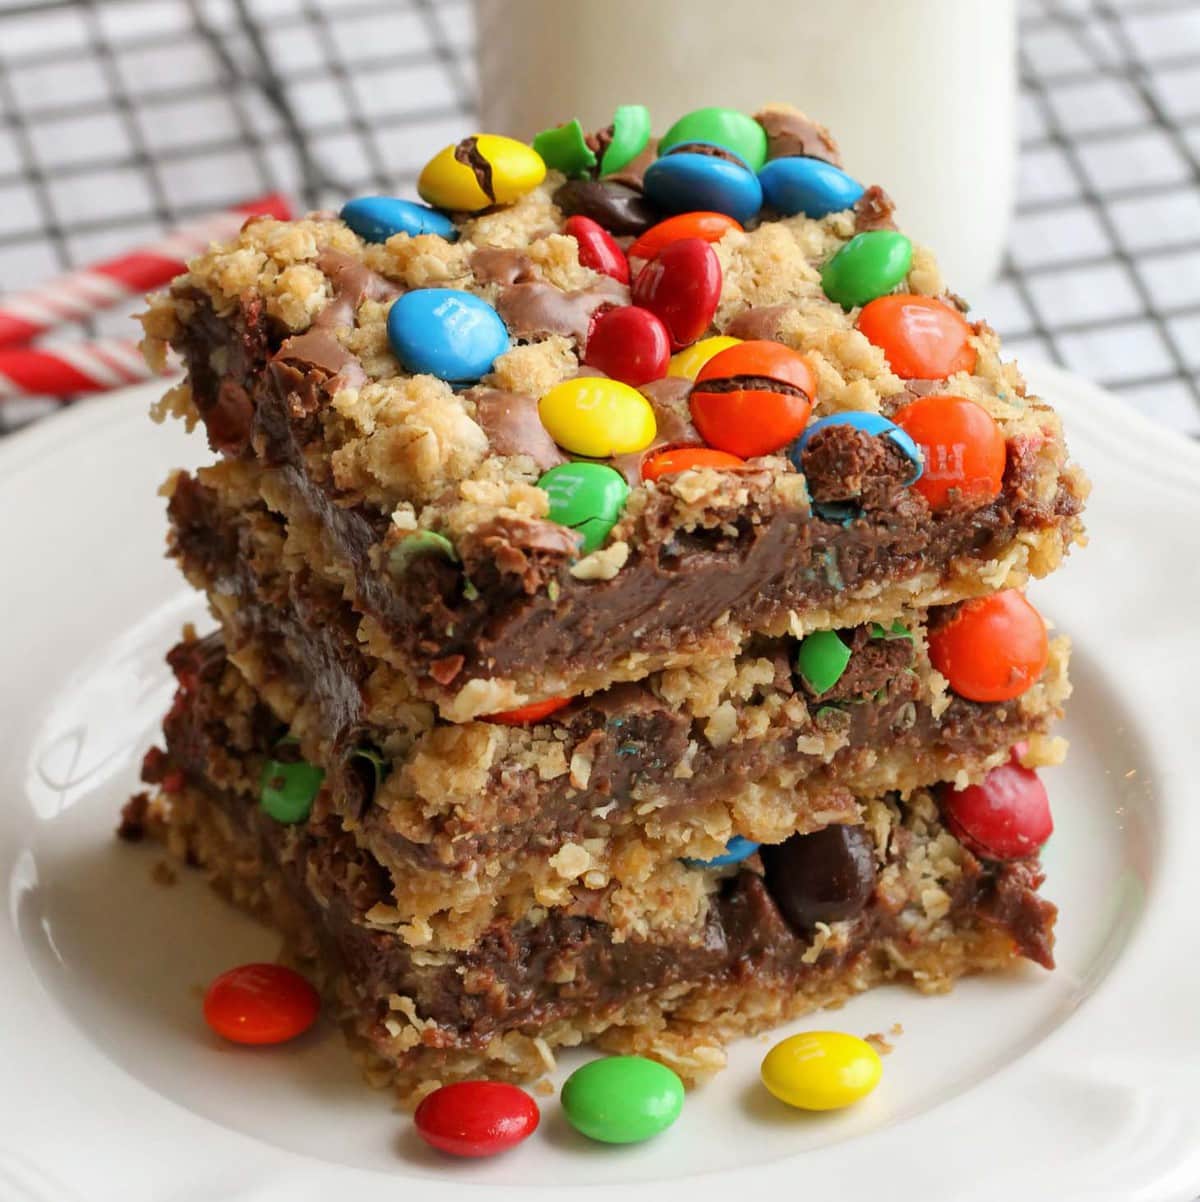 Cookie bar recipes - m&m chocolate bars stacked on a white plate.